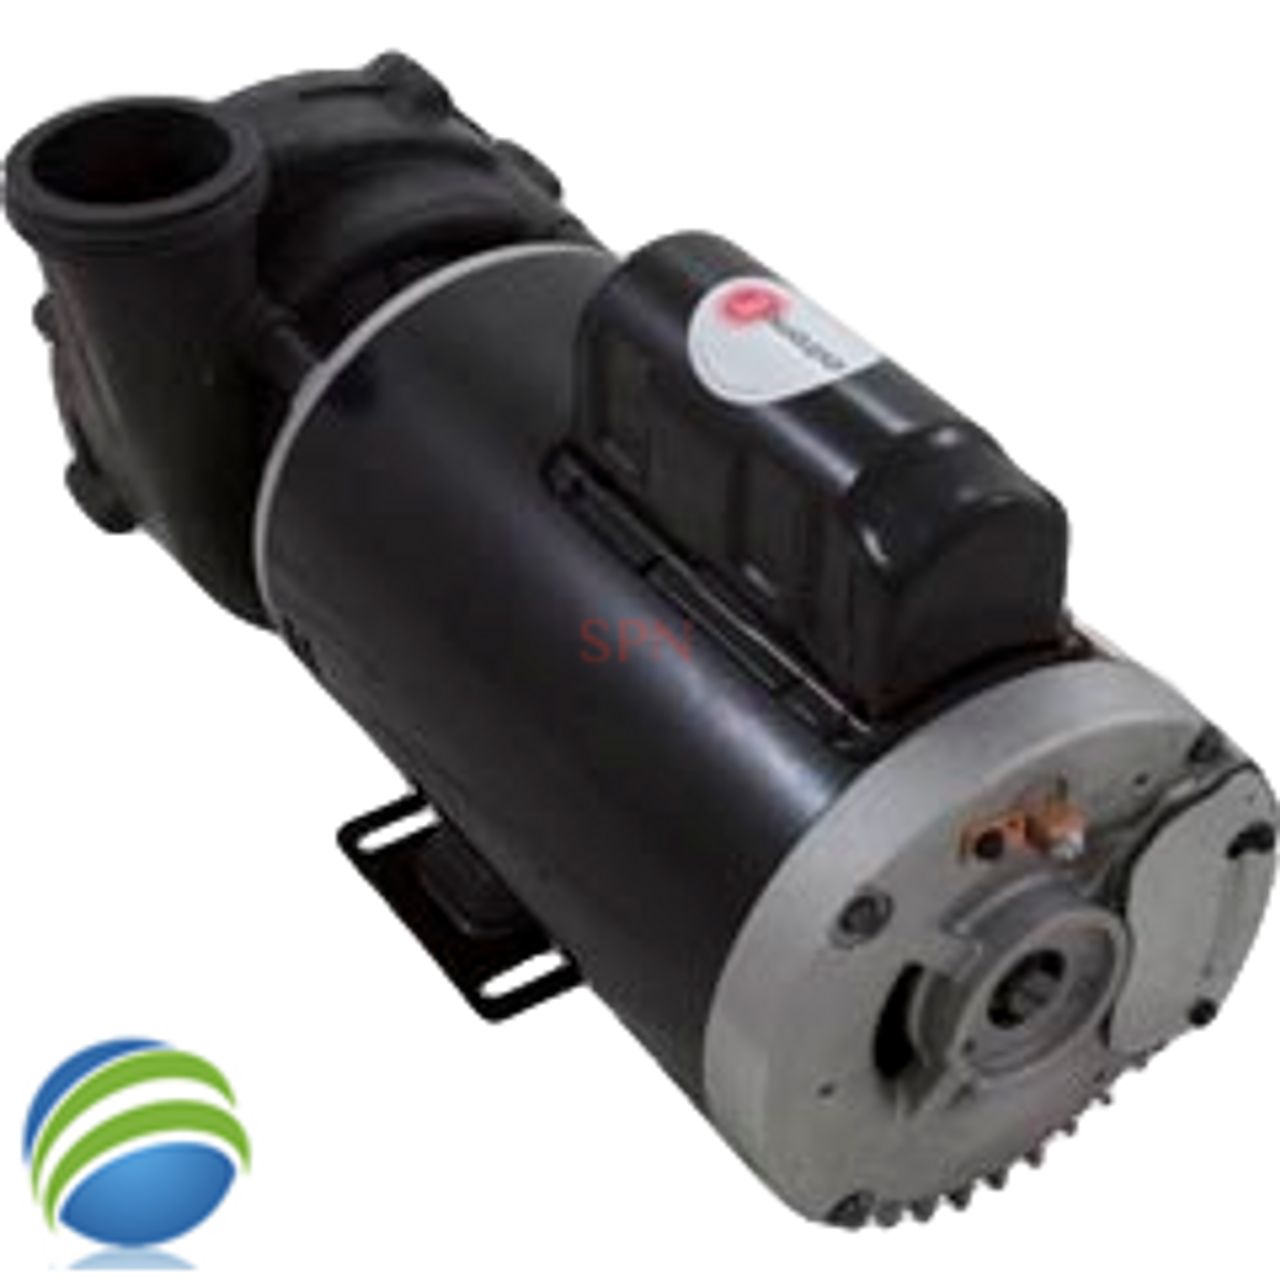 Complete Pump, Aqua-Flo, XP2e,4.0HP ,230v,  56fr, 2"x 2, 1 or 2 Speed 15A
The inlet and outlet measures about 3" across the threads